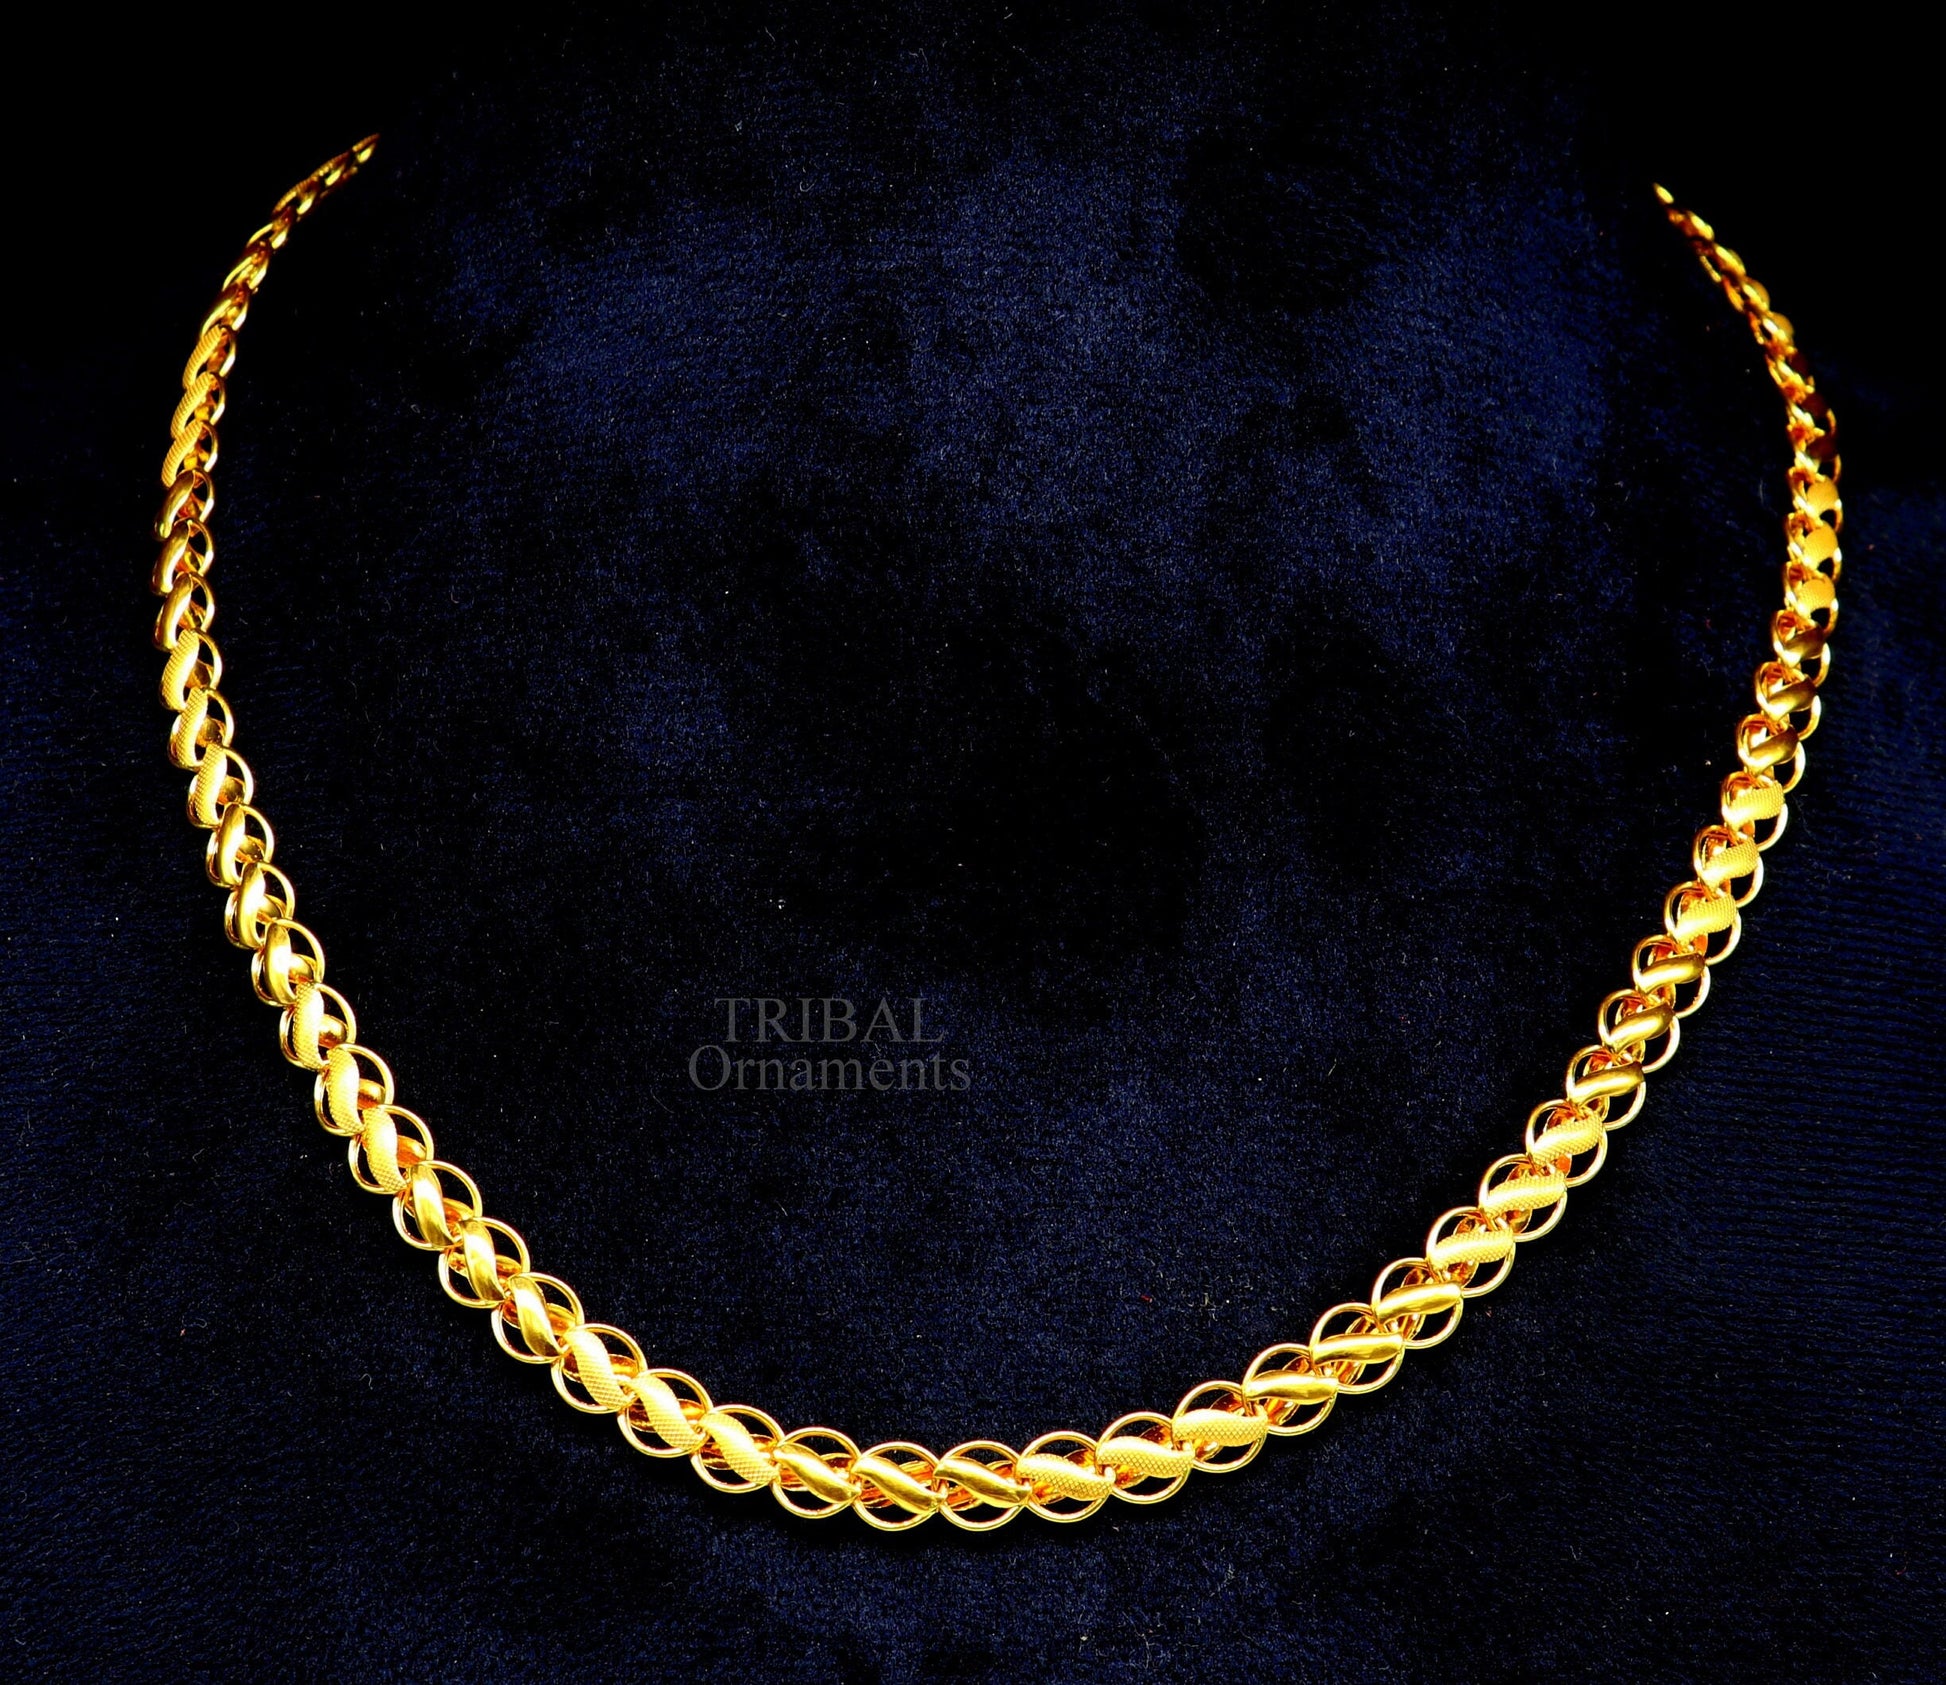 22k yellow gold handmade fabulous lotus chain necklace 18"- 24" customized hallmarked chain men's gifting jewelry wedding anniversary ch548 - TRIBAL ORNAMENTS